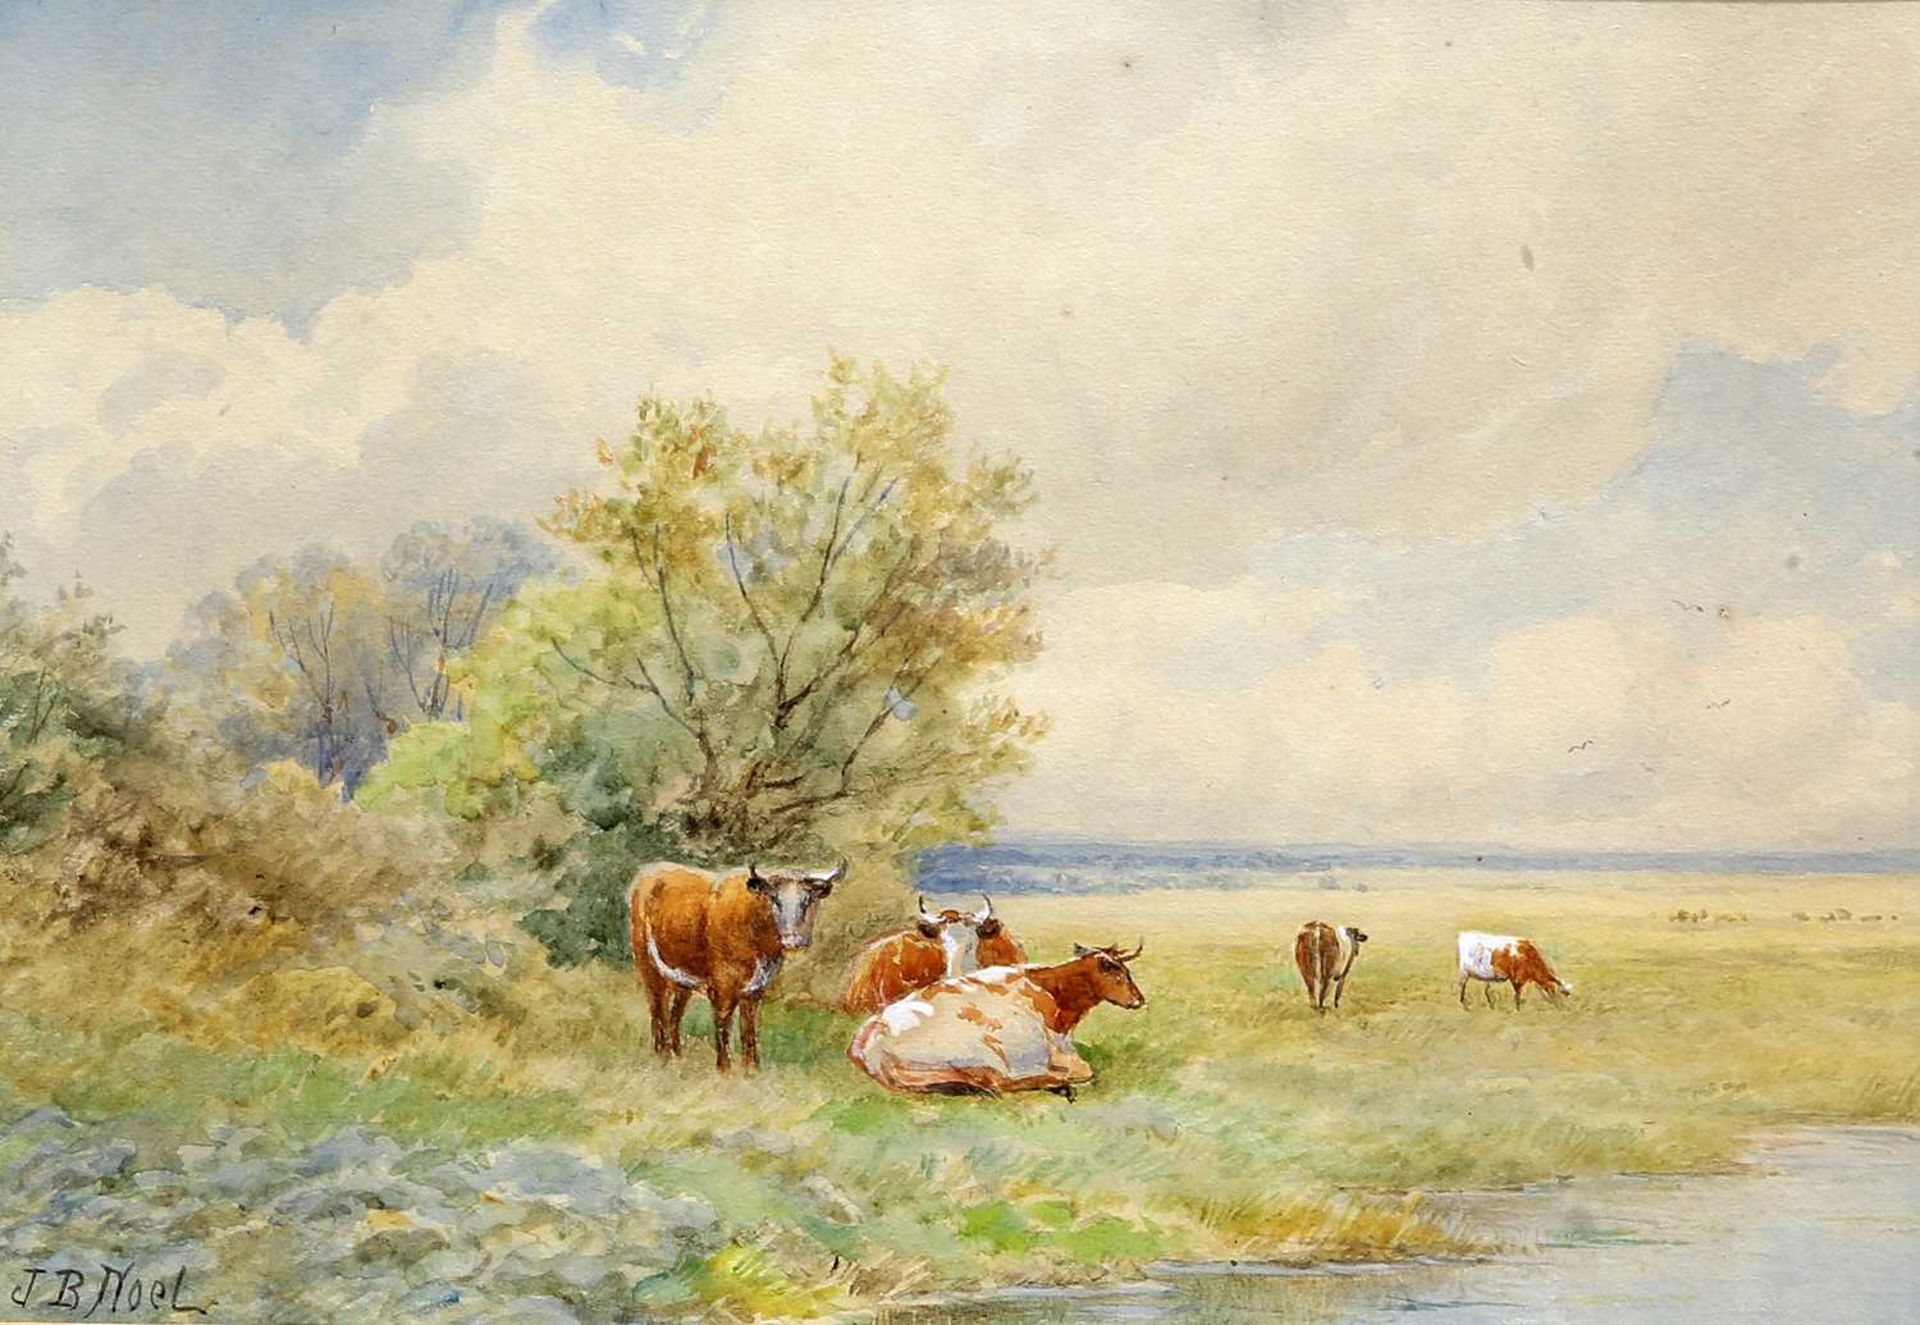 JOHN BATES NOEL (1870-1927) FISHING ON THE RIVER AND CATTLE ON THE RIVERBANK, A PAIR